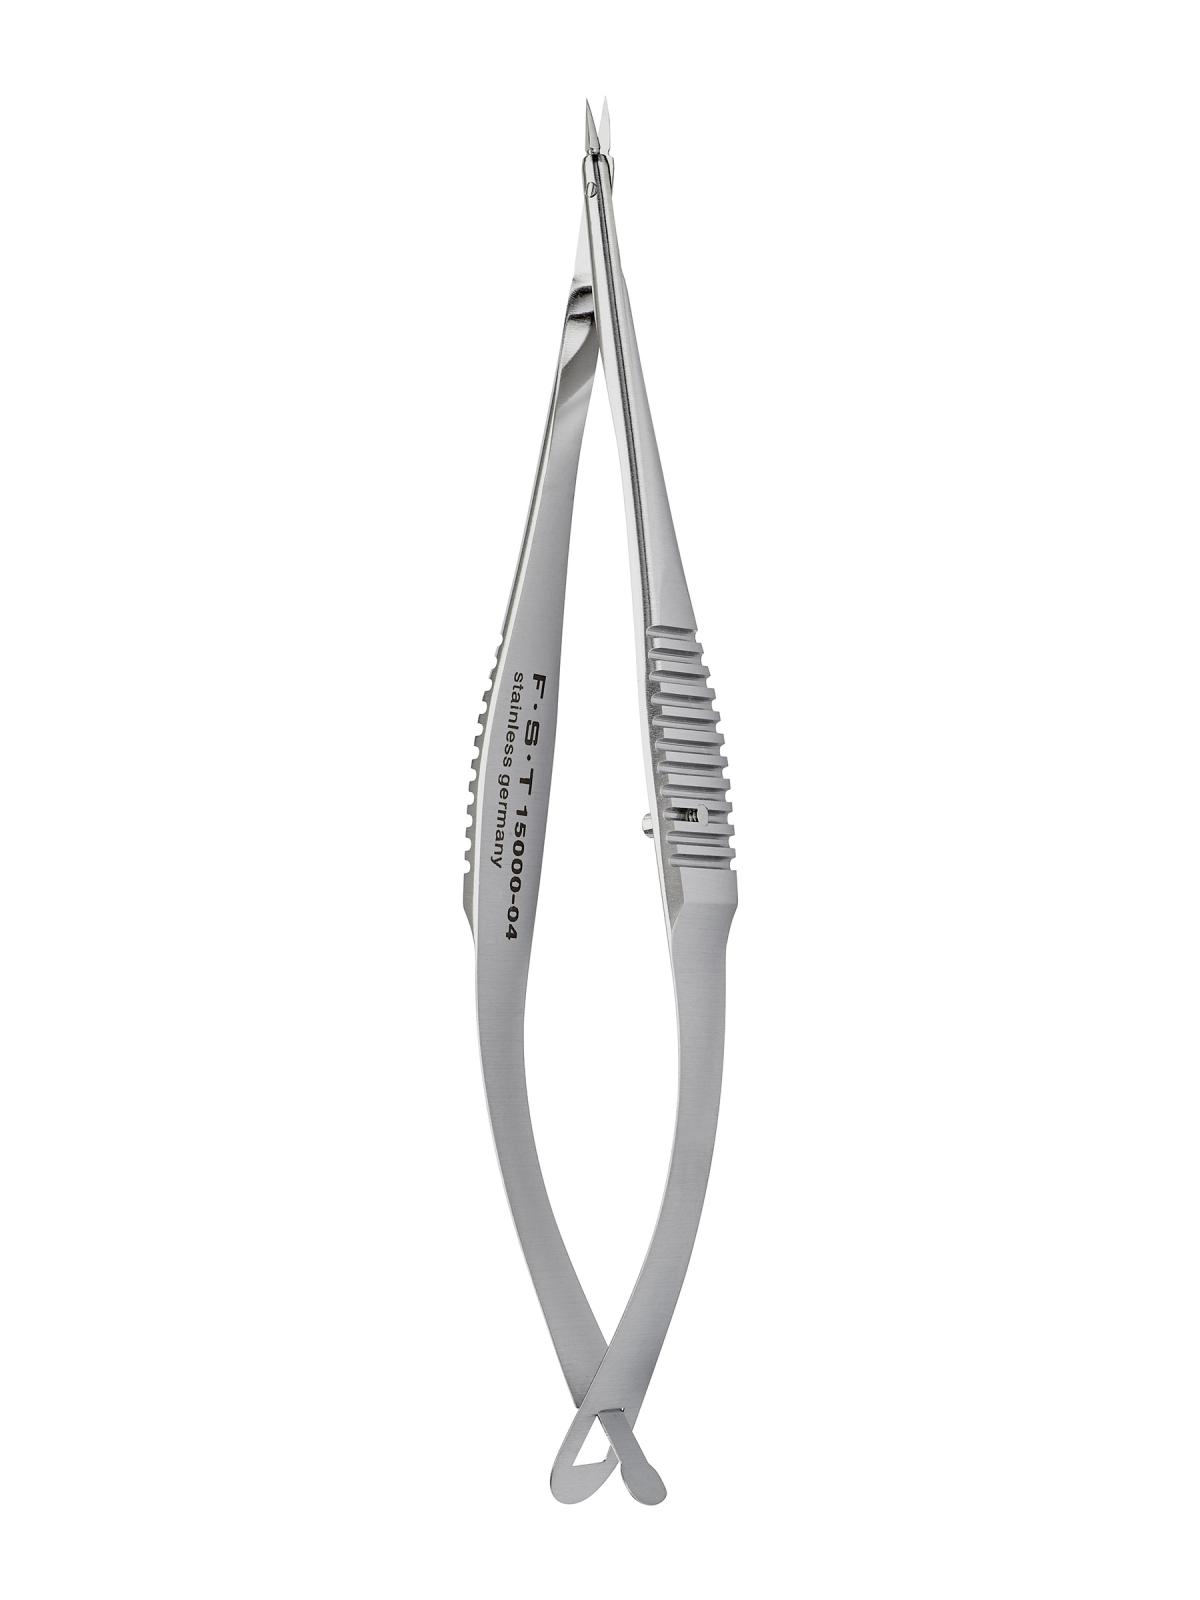 Stainless Steel Curved Micro Spring Scissors